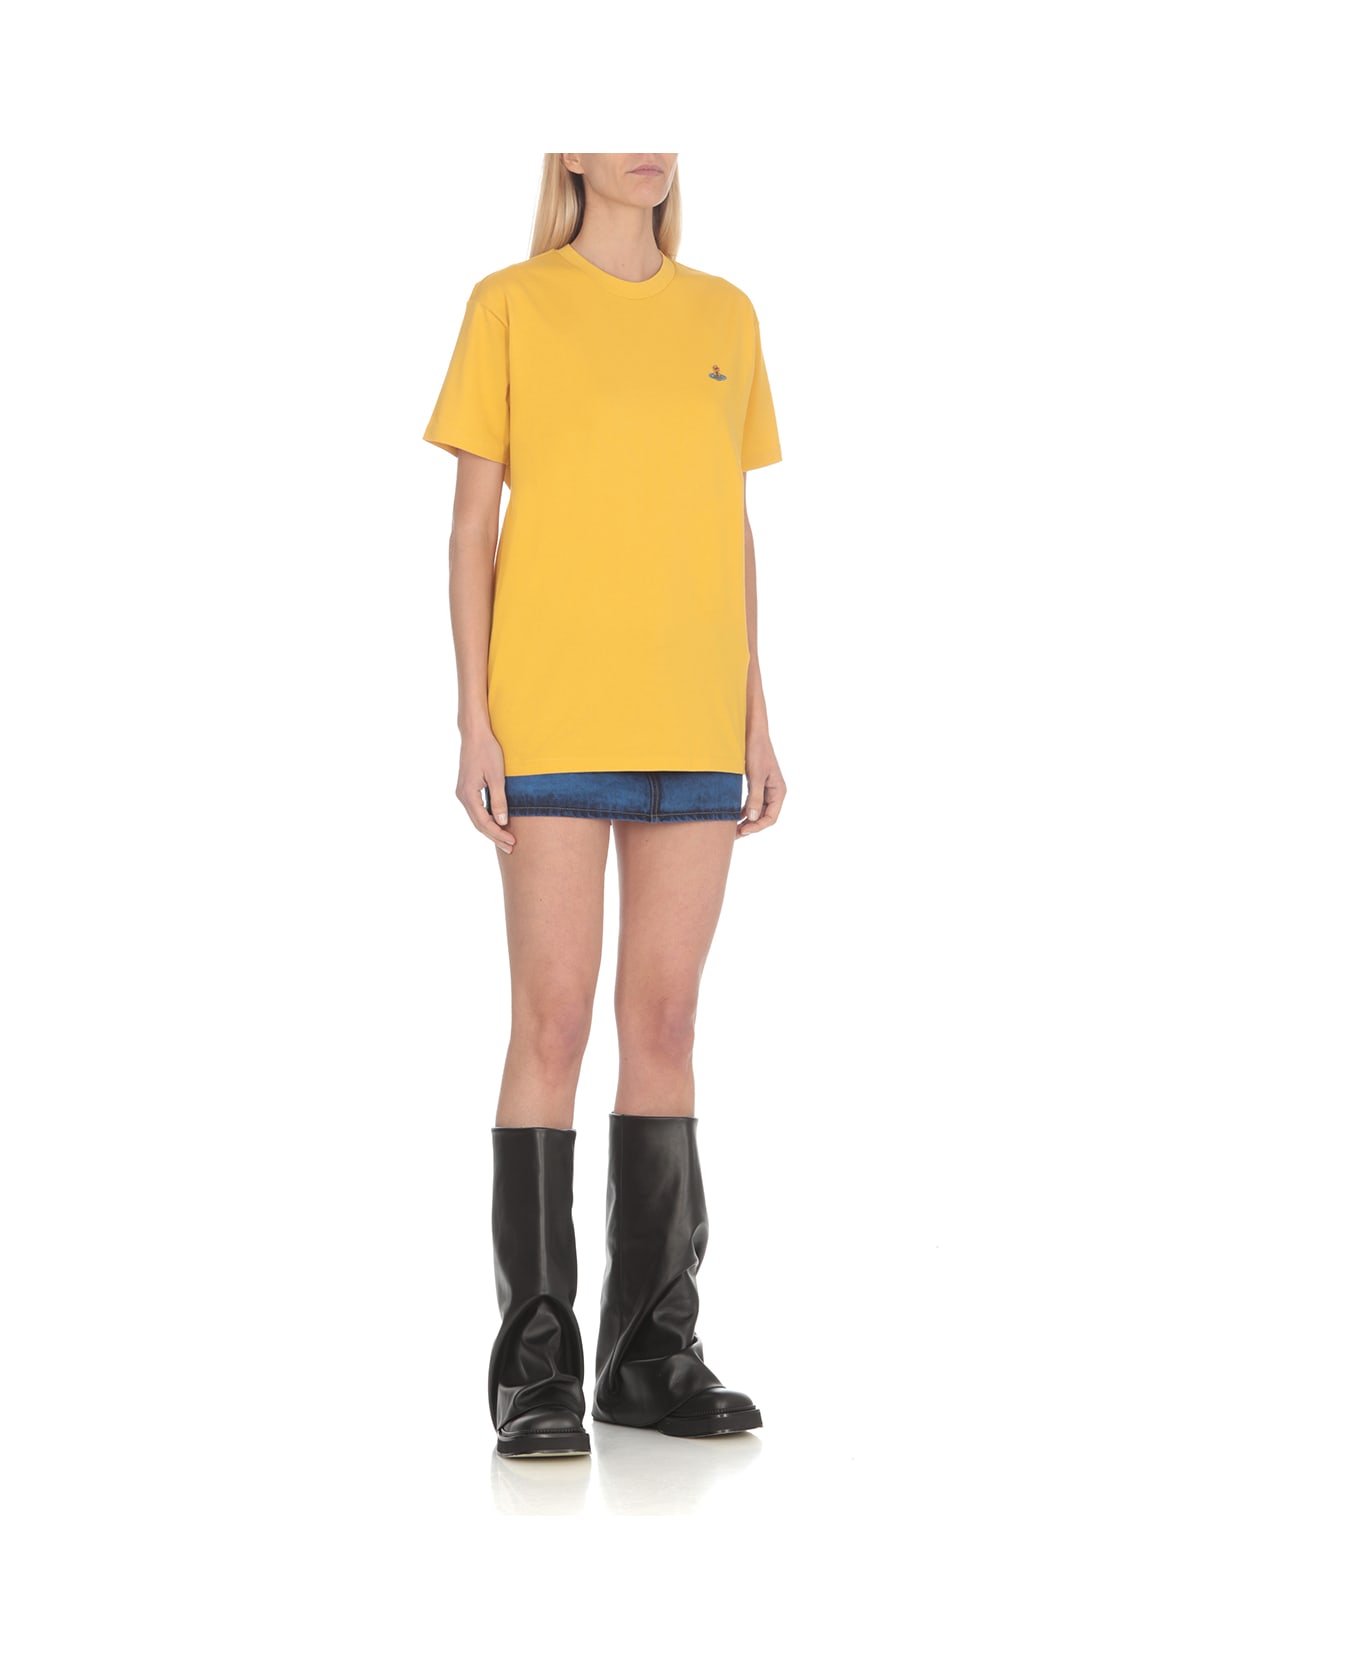 Vivienne Westwood Classic Orb T-shirt - Yellow